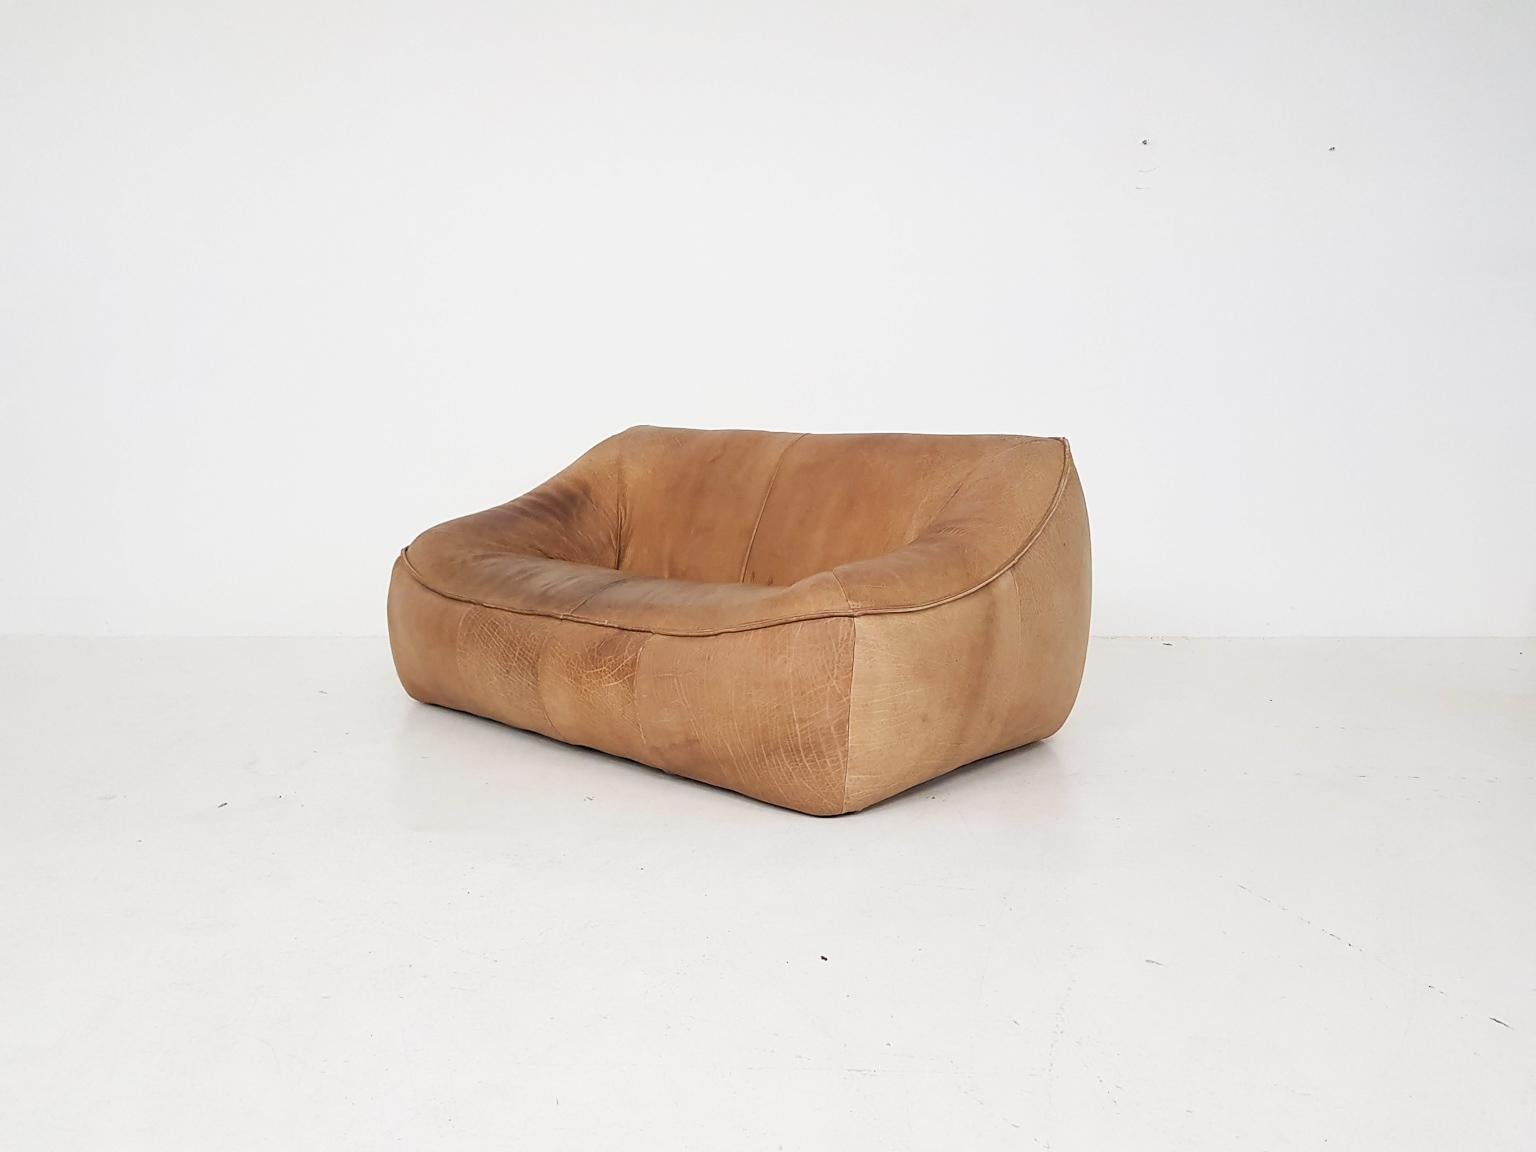 Super rare leather two-seat sofa by Dutch designer Gerard van den Berg. Made by Montis the Netherlands in the 1970s.

This two-seat sofa is called 